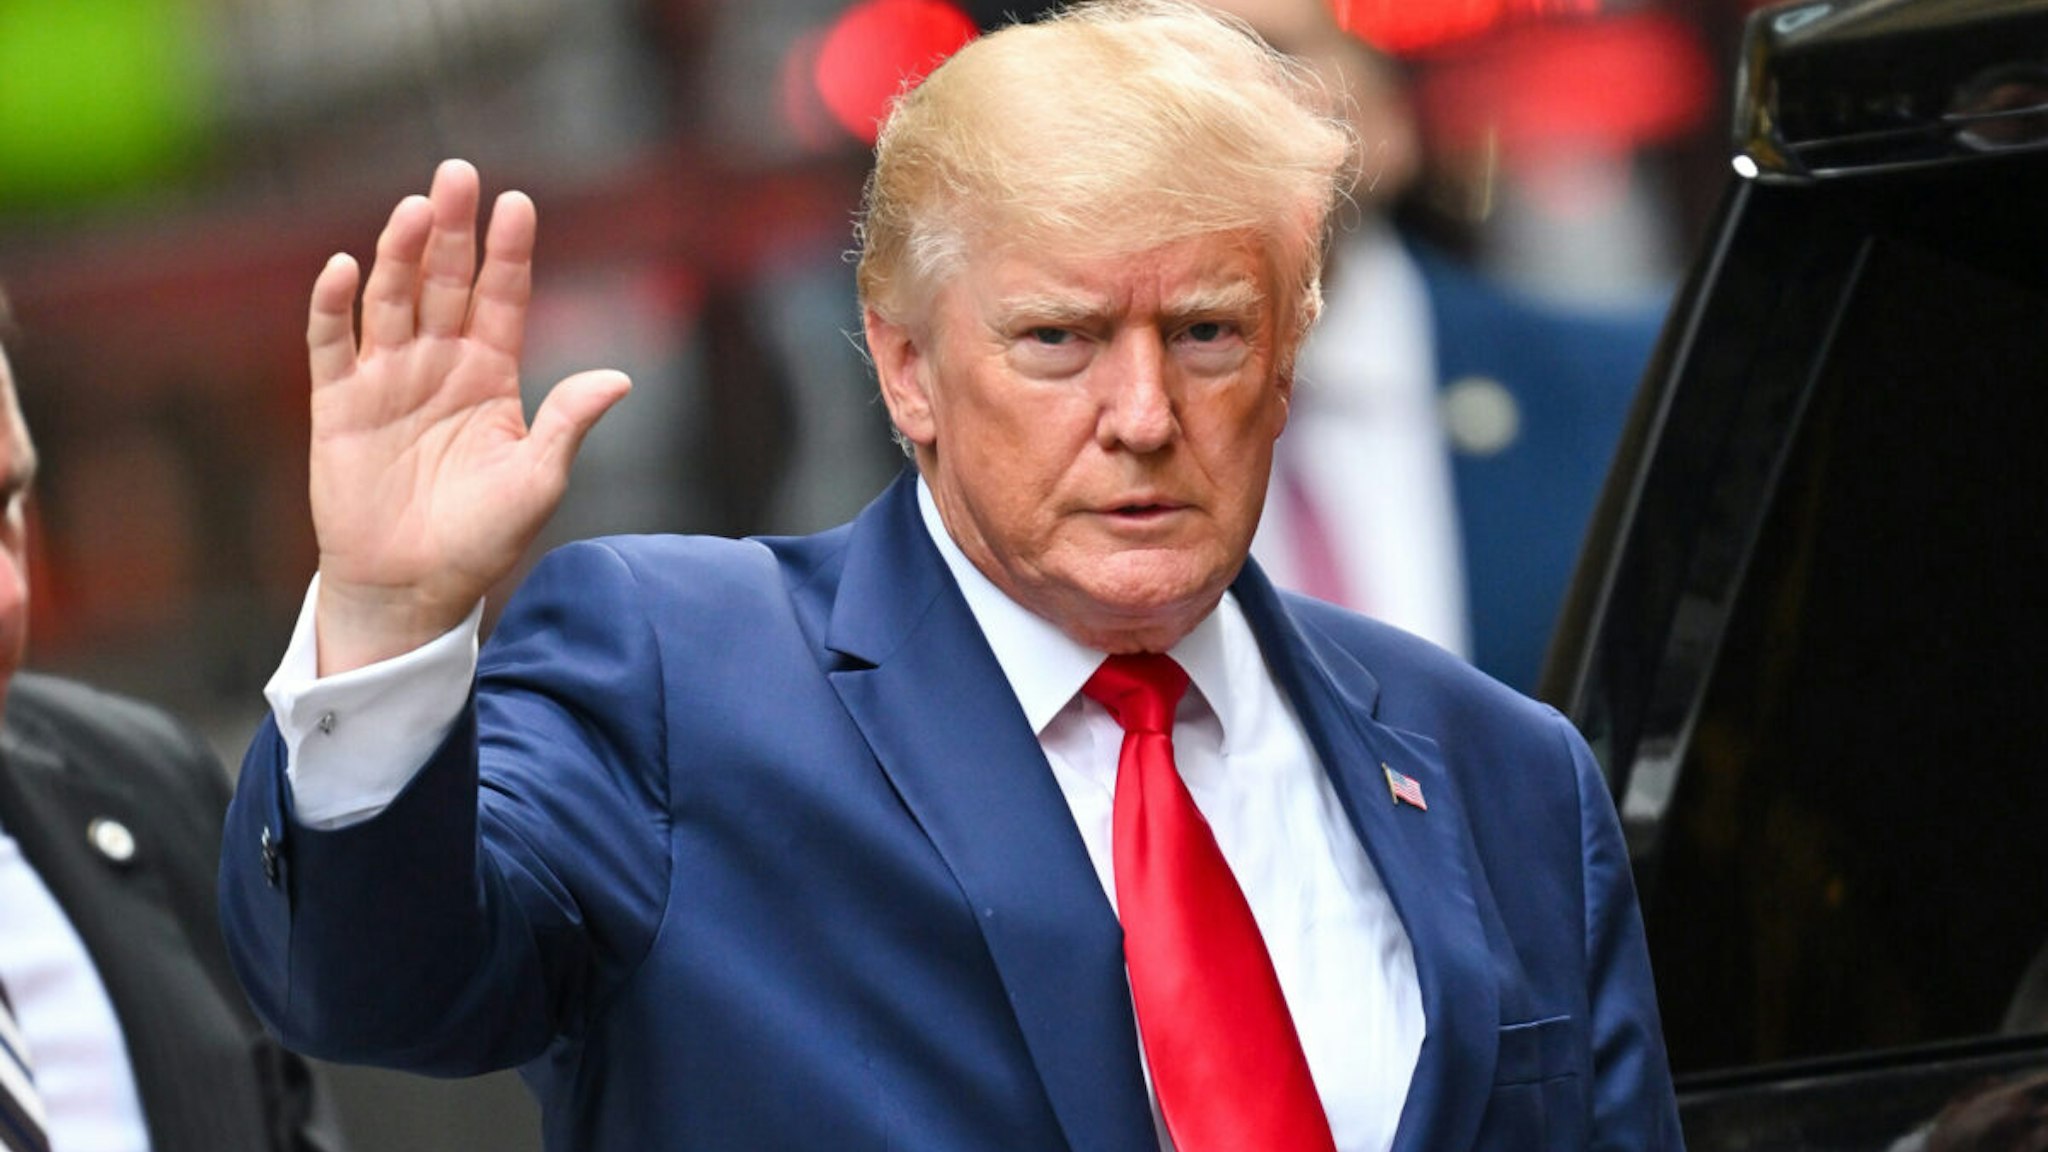 Former U.S. President Donald Trump leaves Trump Tower to meet with New York Attorney General Letitia James for a civil investigation on August 10, 2022 in New York City.